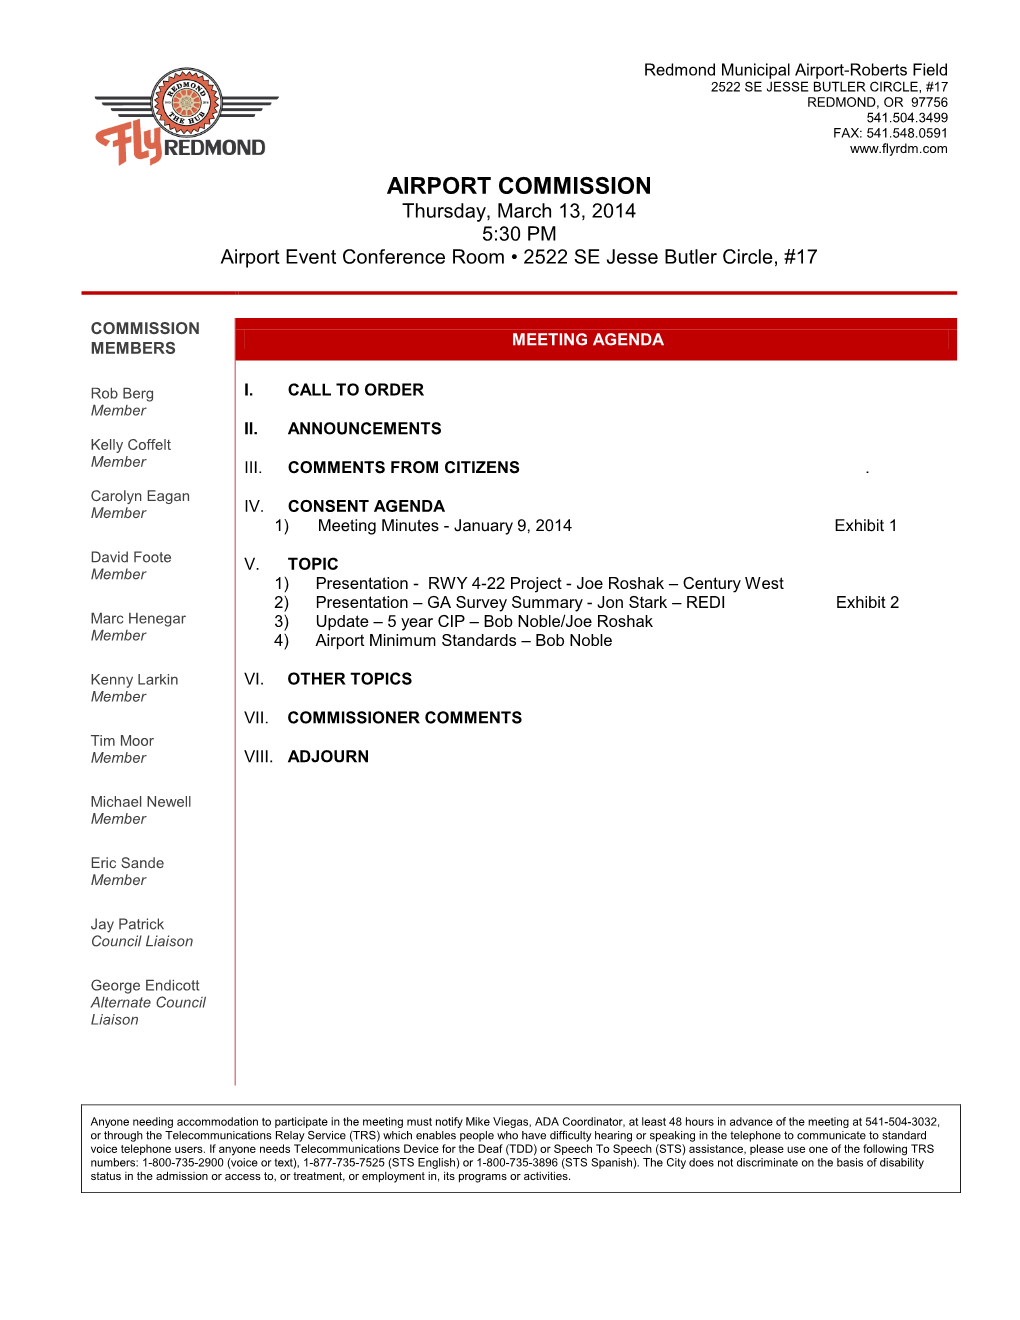 AIRPORT COMMISSION Thursday, March 13, 2014 5:30 PM Airport Event Conference Room • 2522 SE Jesse Butler Circle, #17